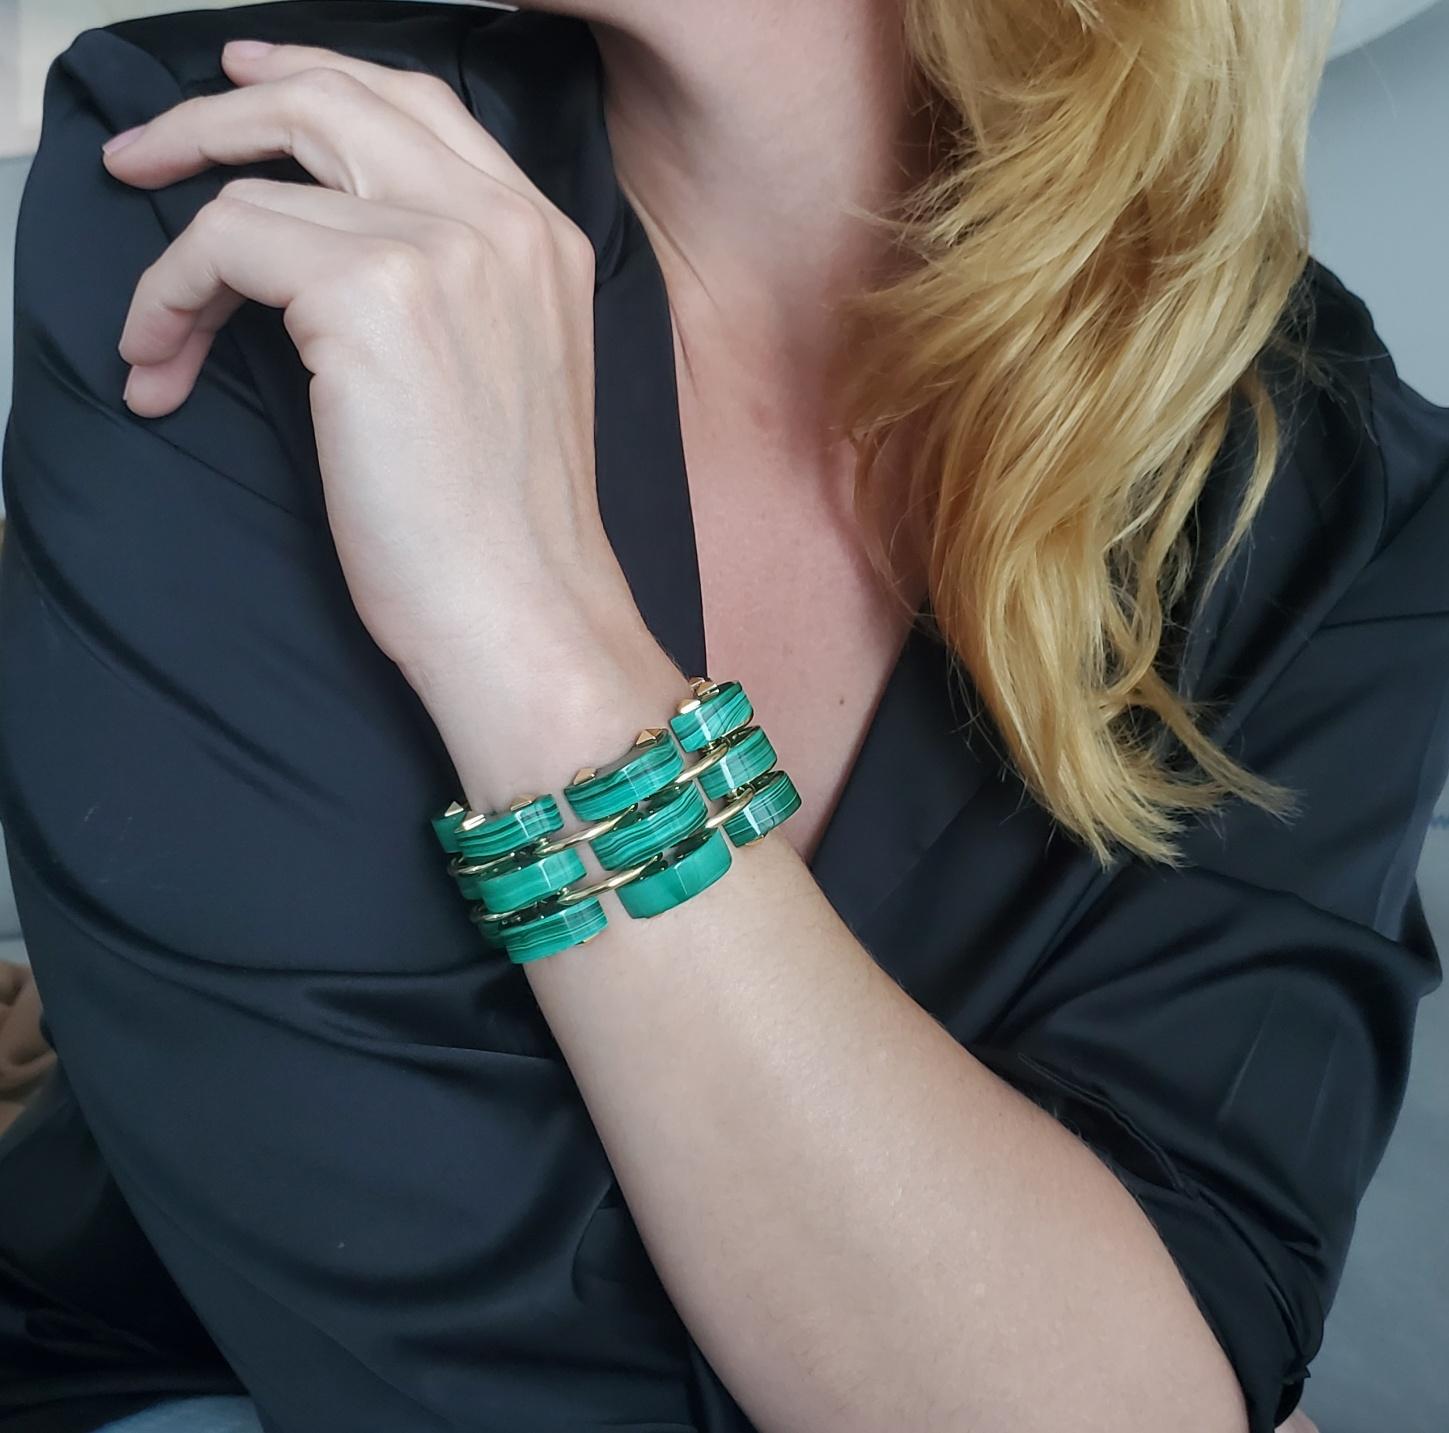 Geometric bracelet designed by the Aletto Brothers.

A contemporary masterpiece of geometric design. This fabulous flexible links bracelet was created by the jewelry designers Aletto Brothers as a part of the new triple rows malachite collection. It